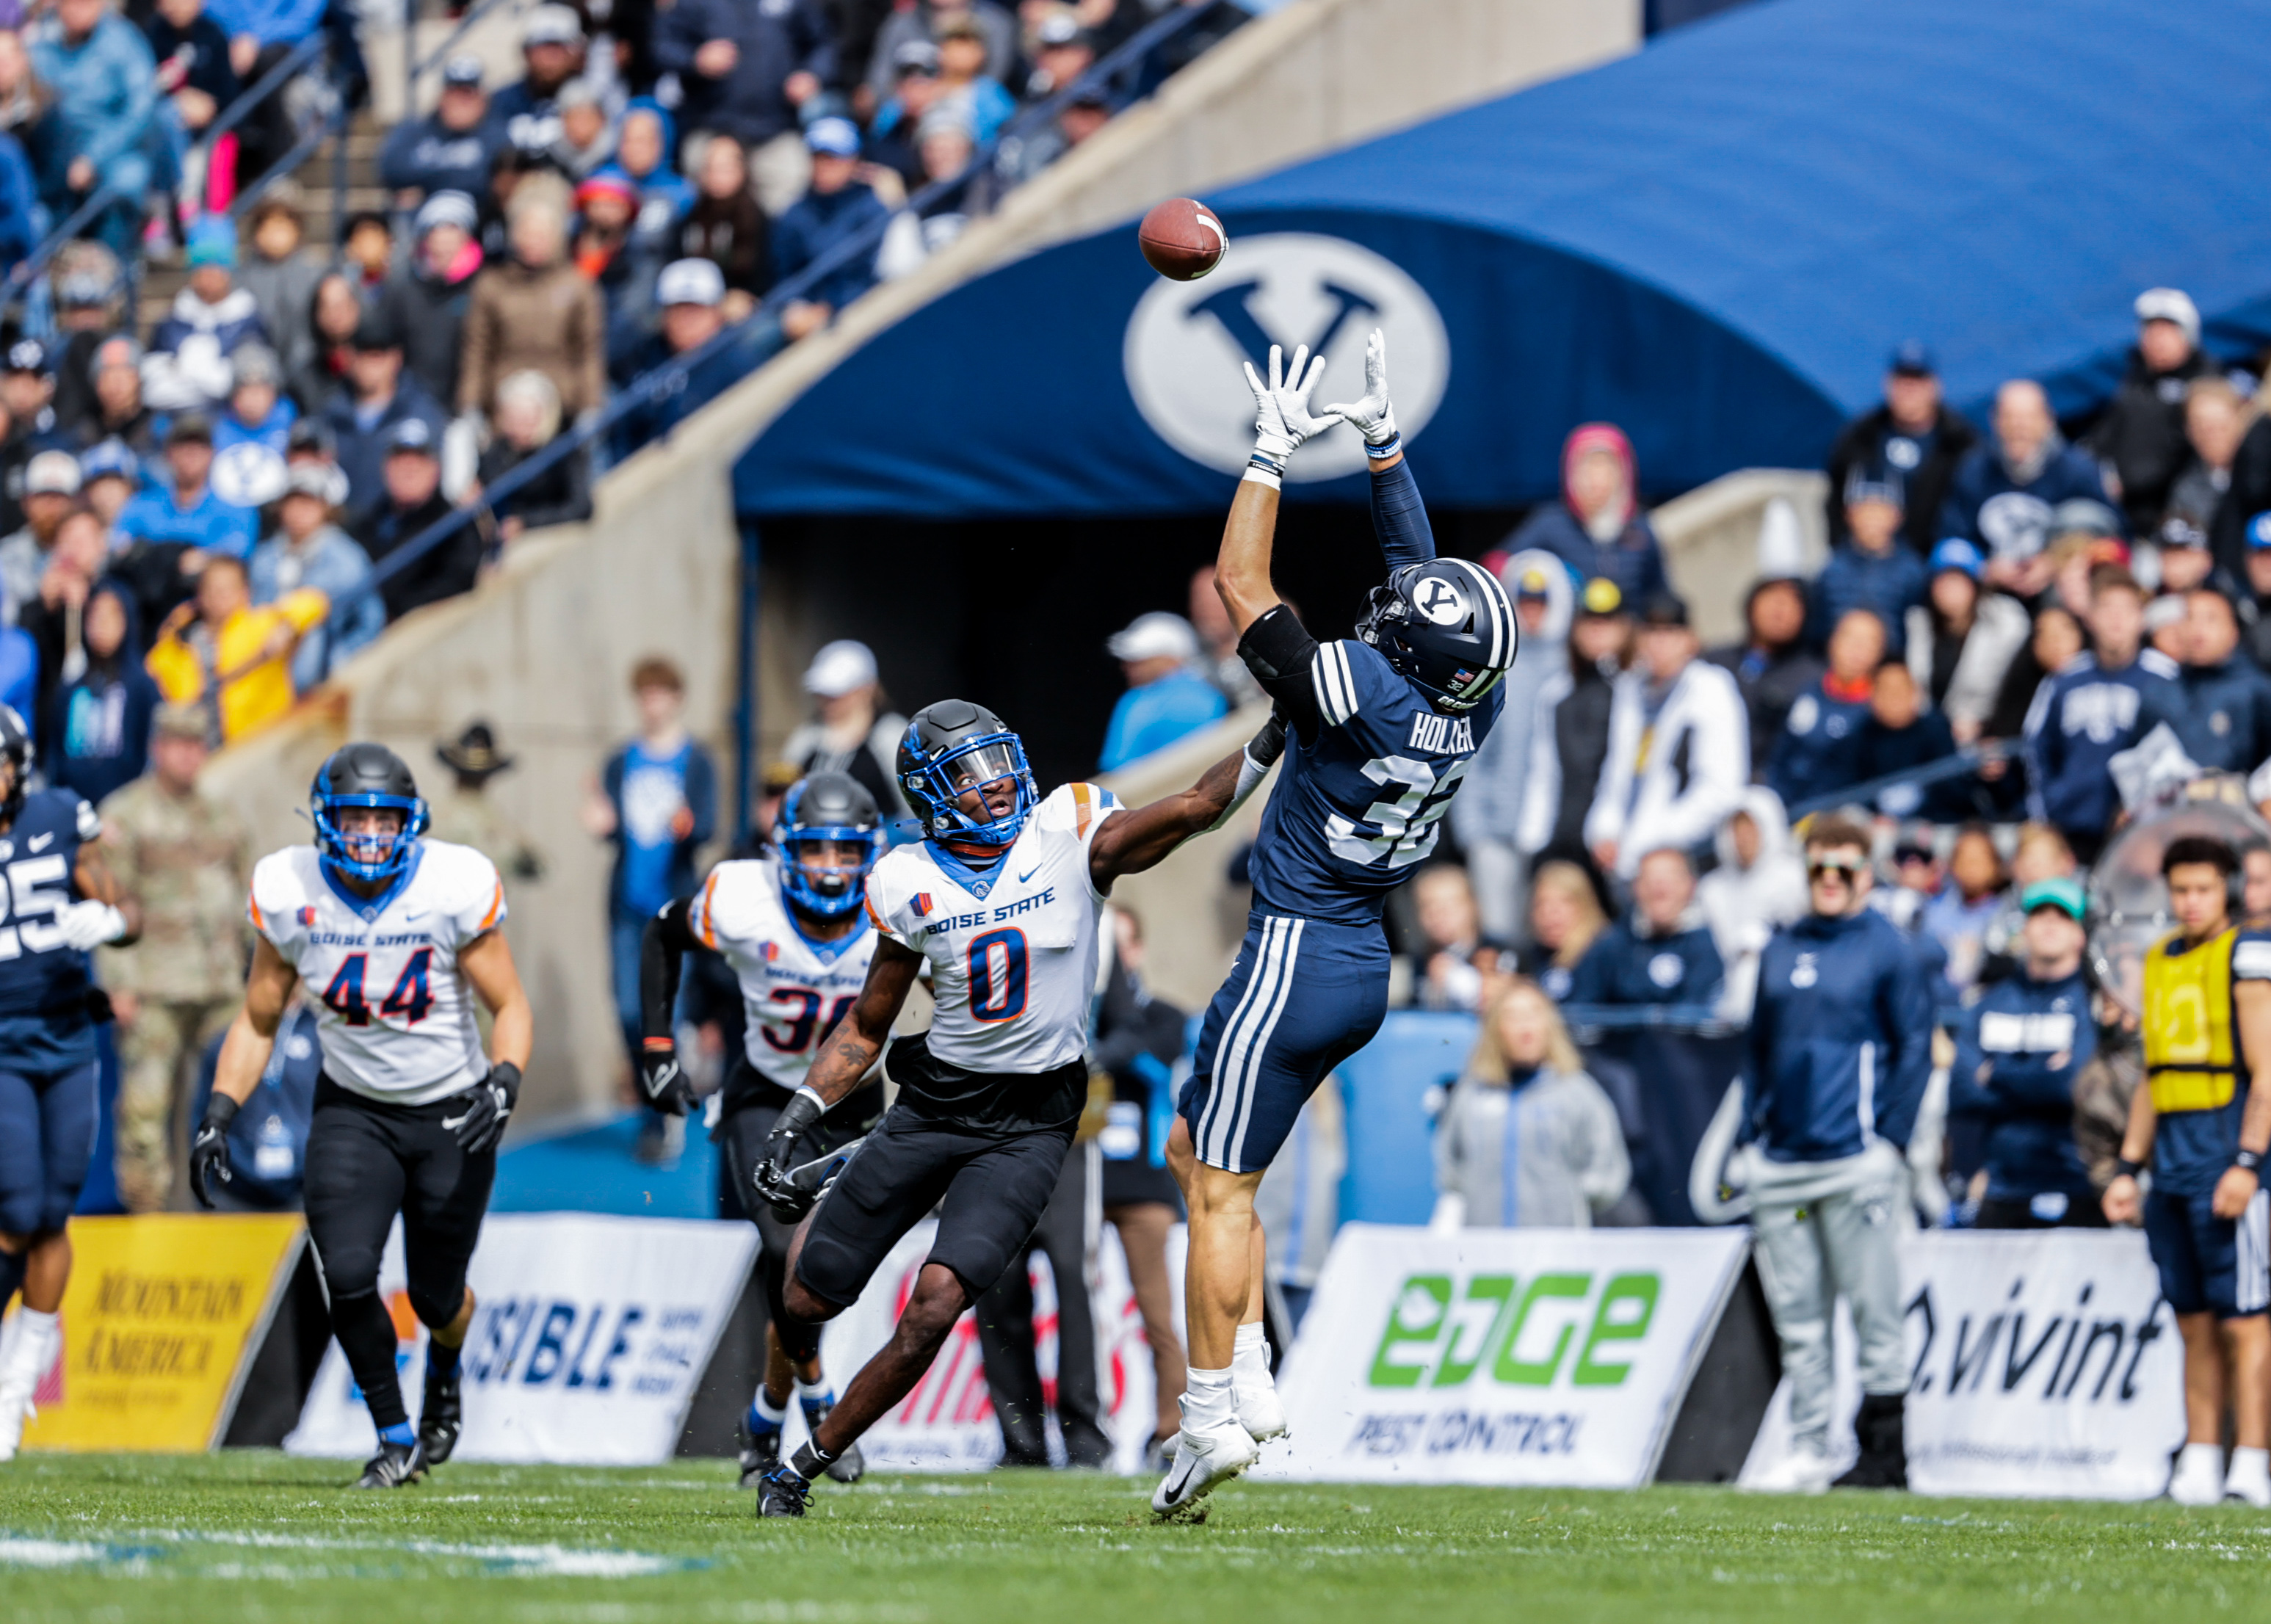 Dallin Holker completes catch against Boise State.